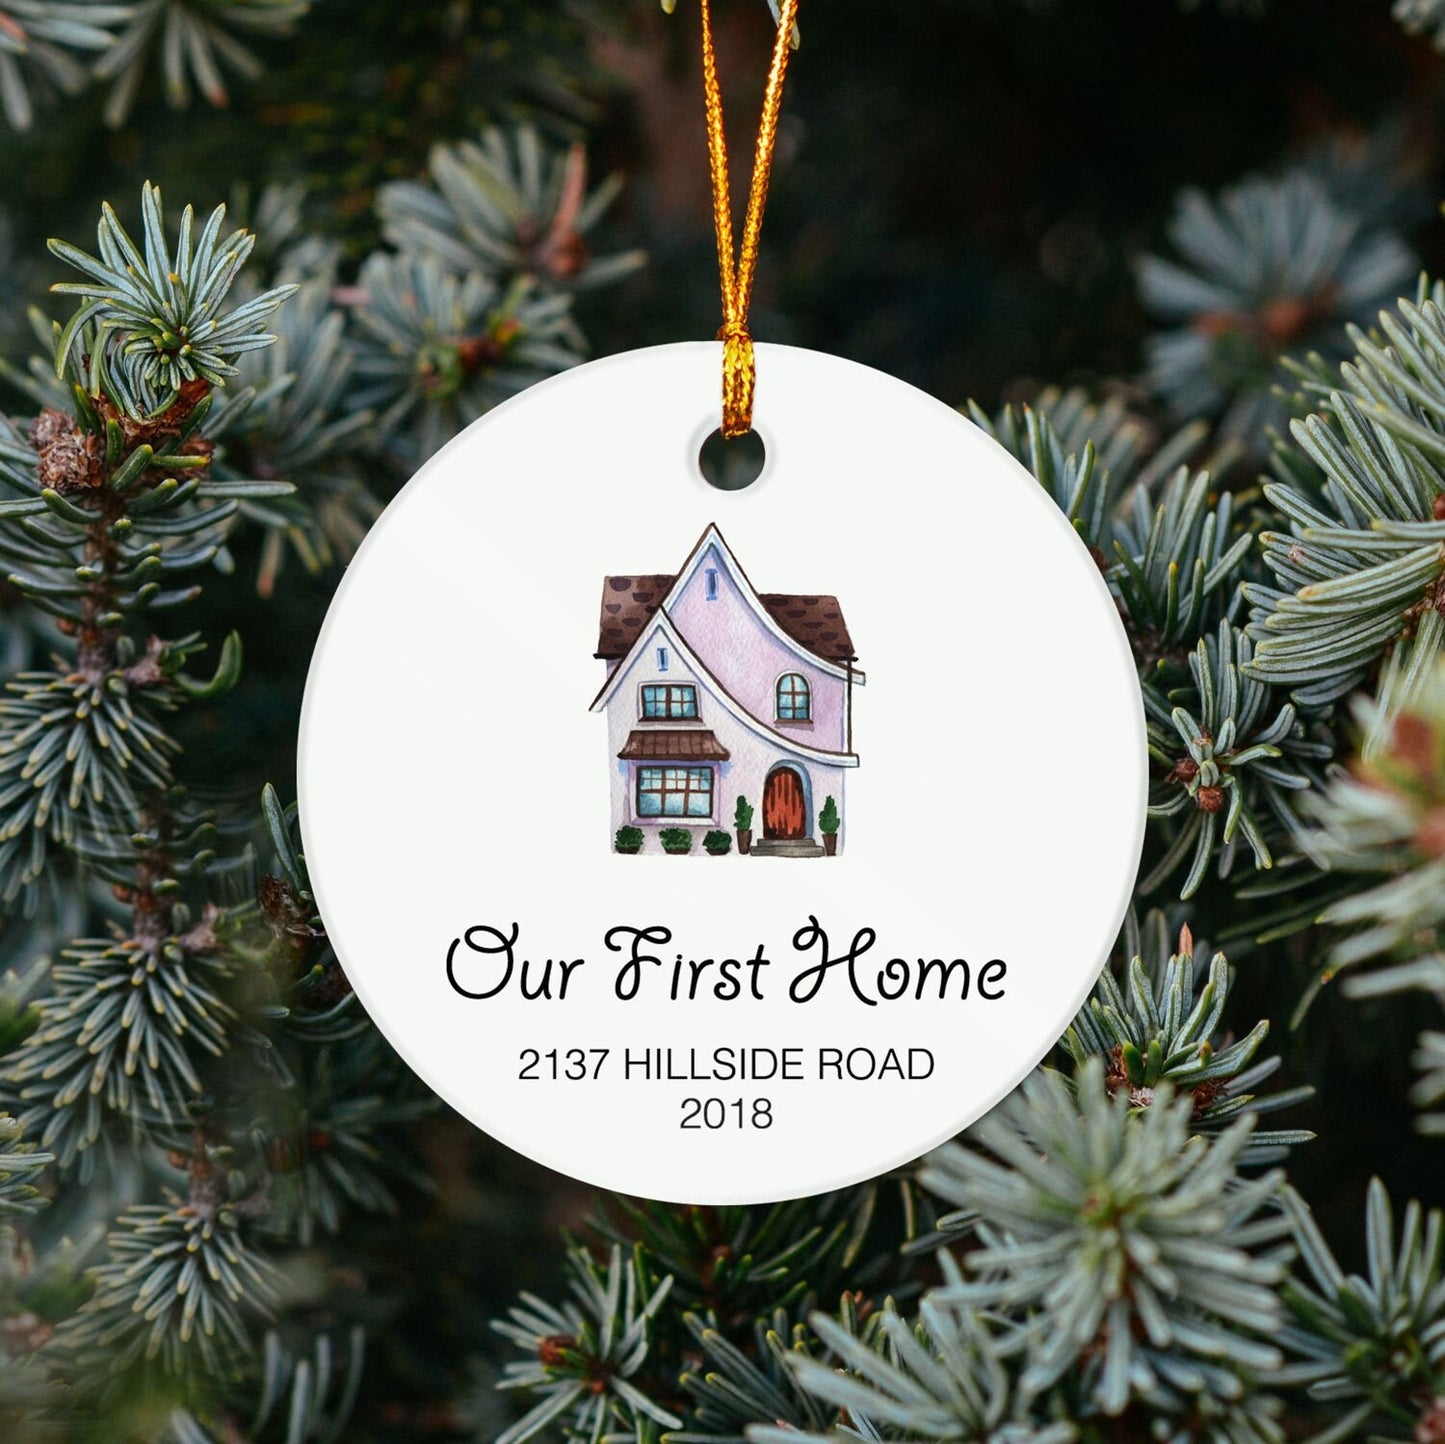 Our First Home Ornament - Personalized Ornament- Housewarming Gift - Our First Christmas At OR20 and OR18